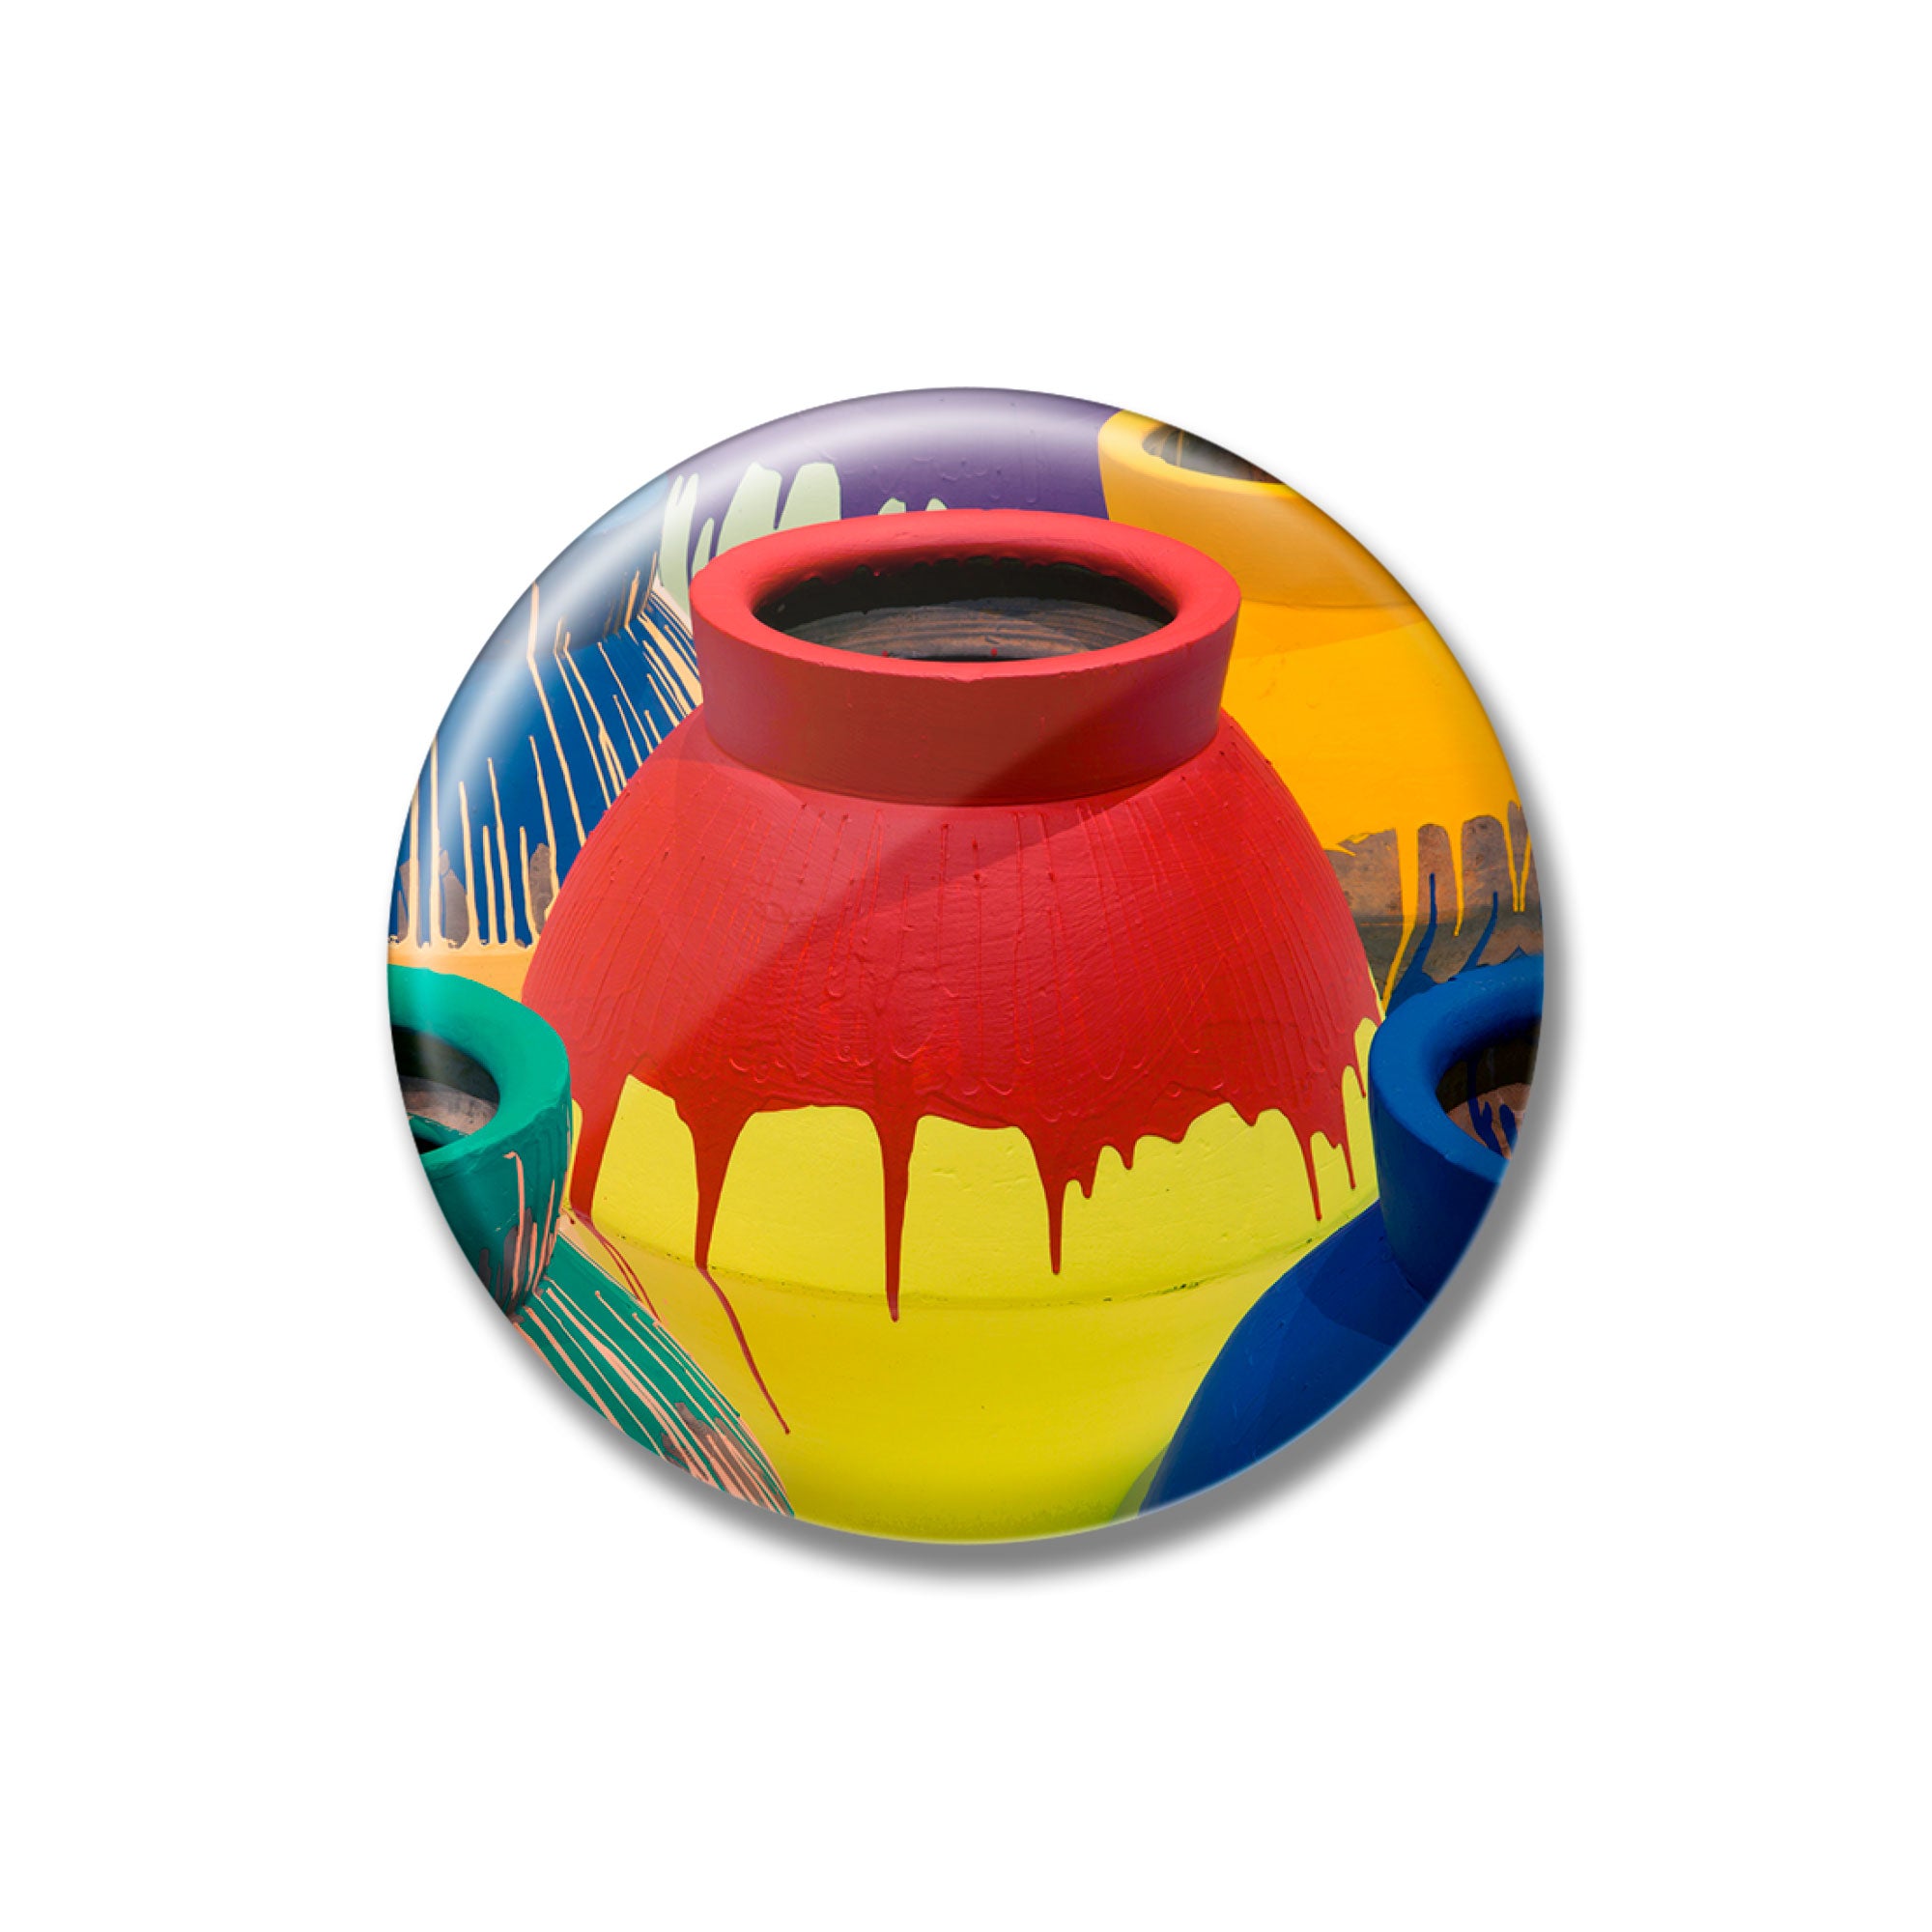 Ai Weiwei - Colored Vases 2.25" Button